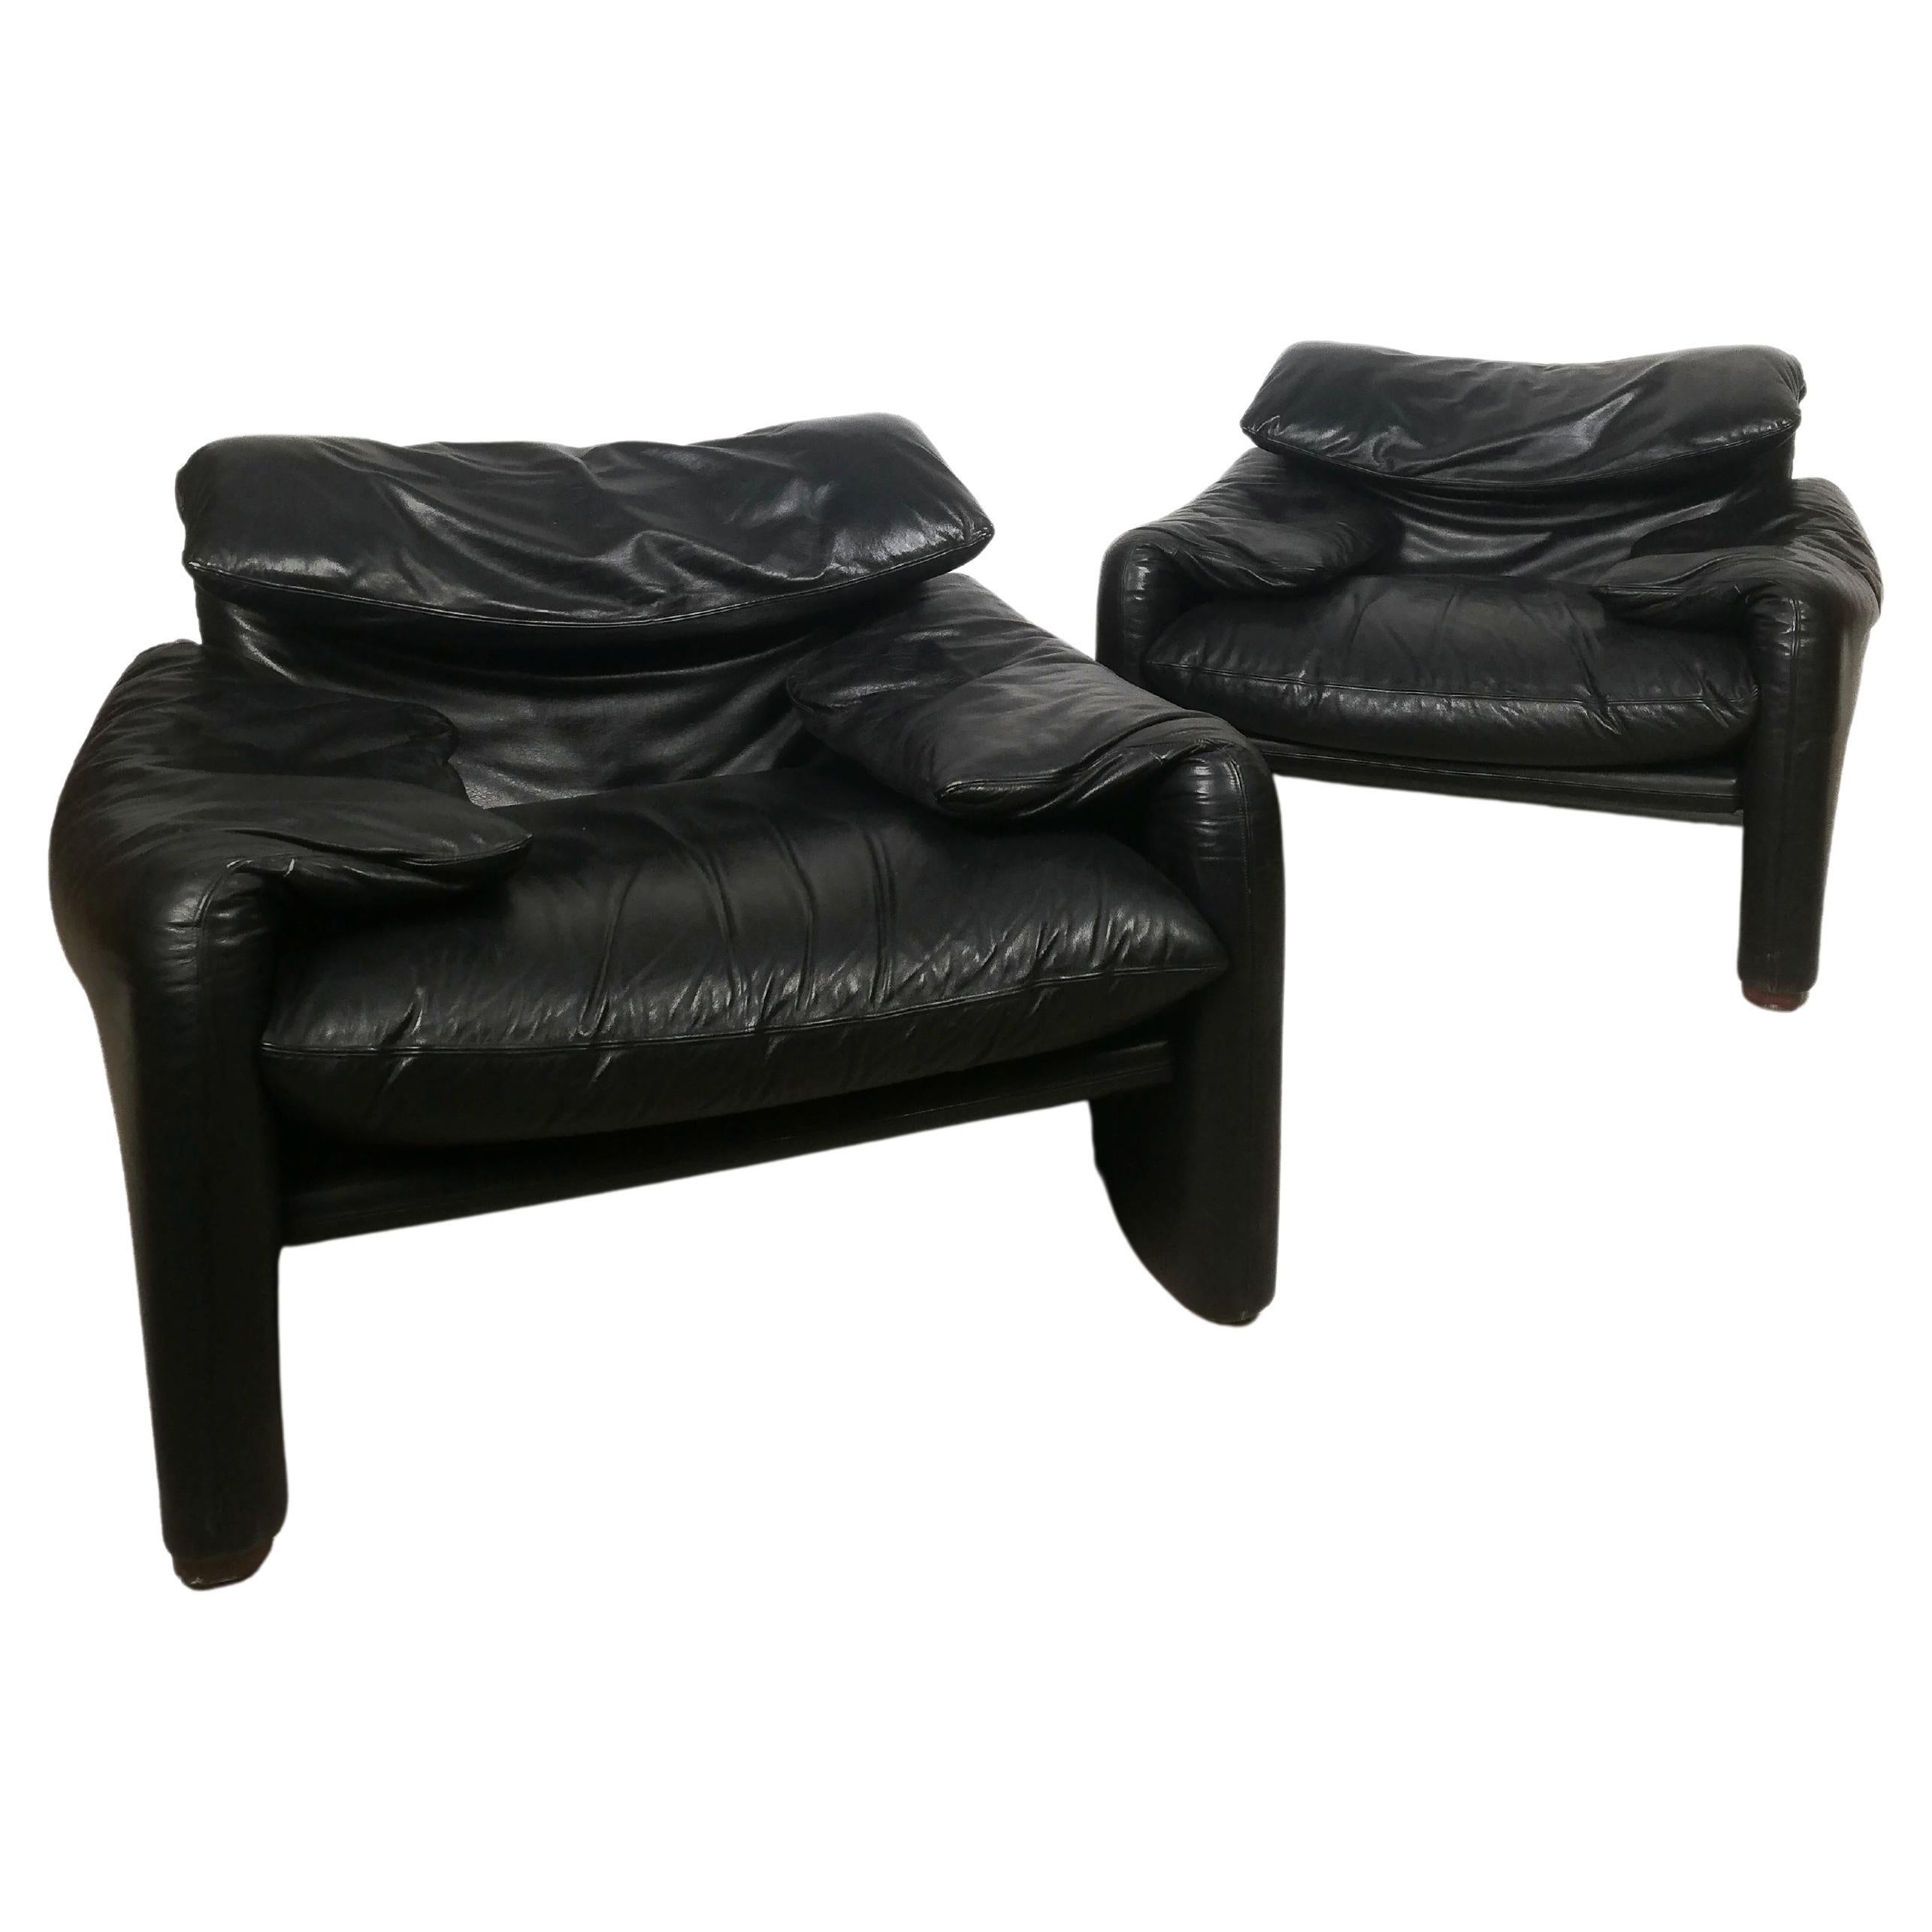 Set of Two Maralunga Black Leather Armchairs by Vico Magistretti For Sale